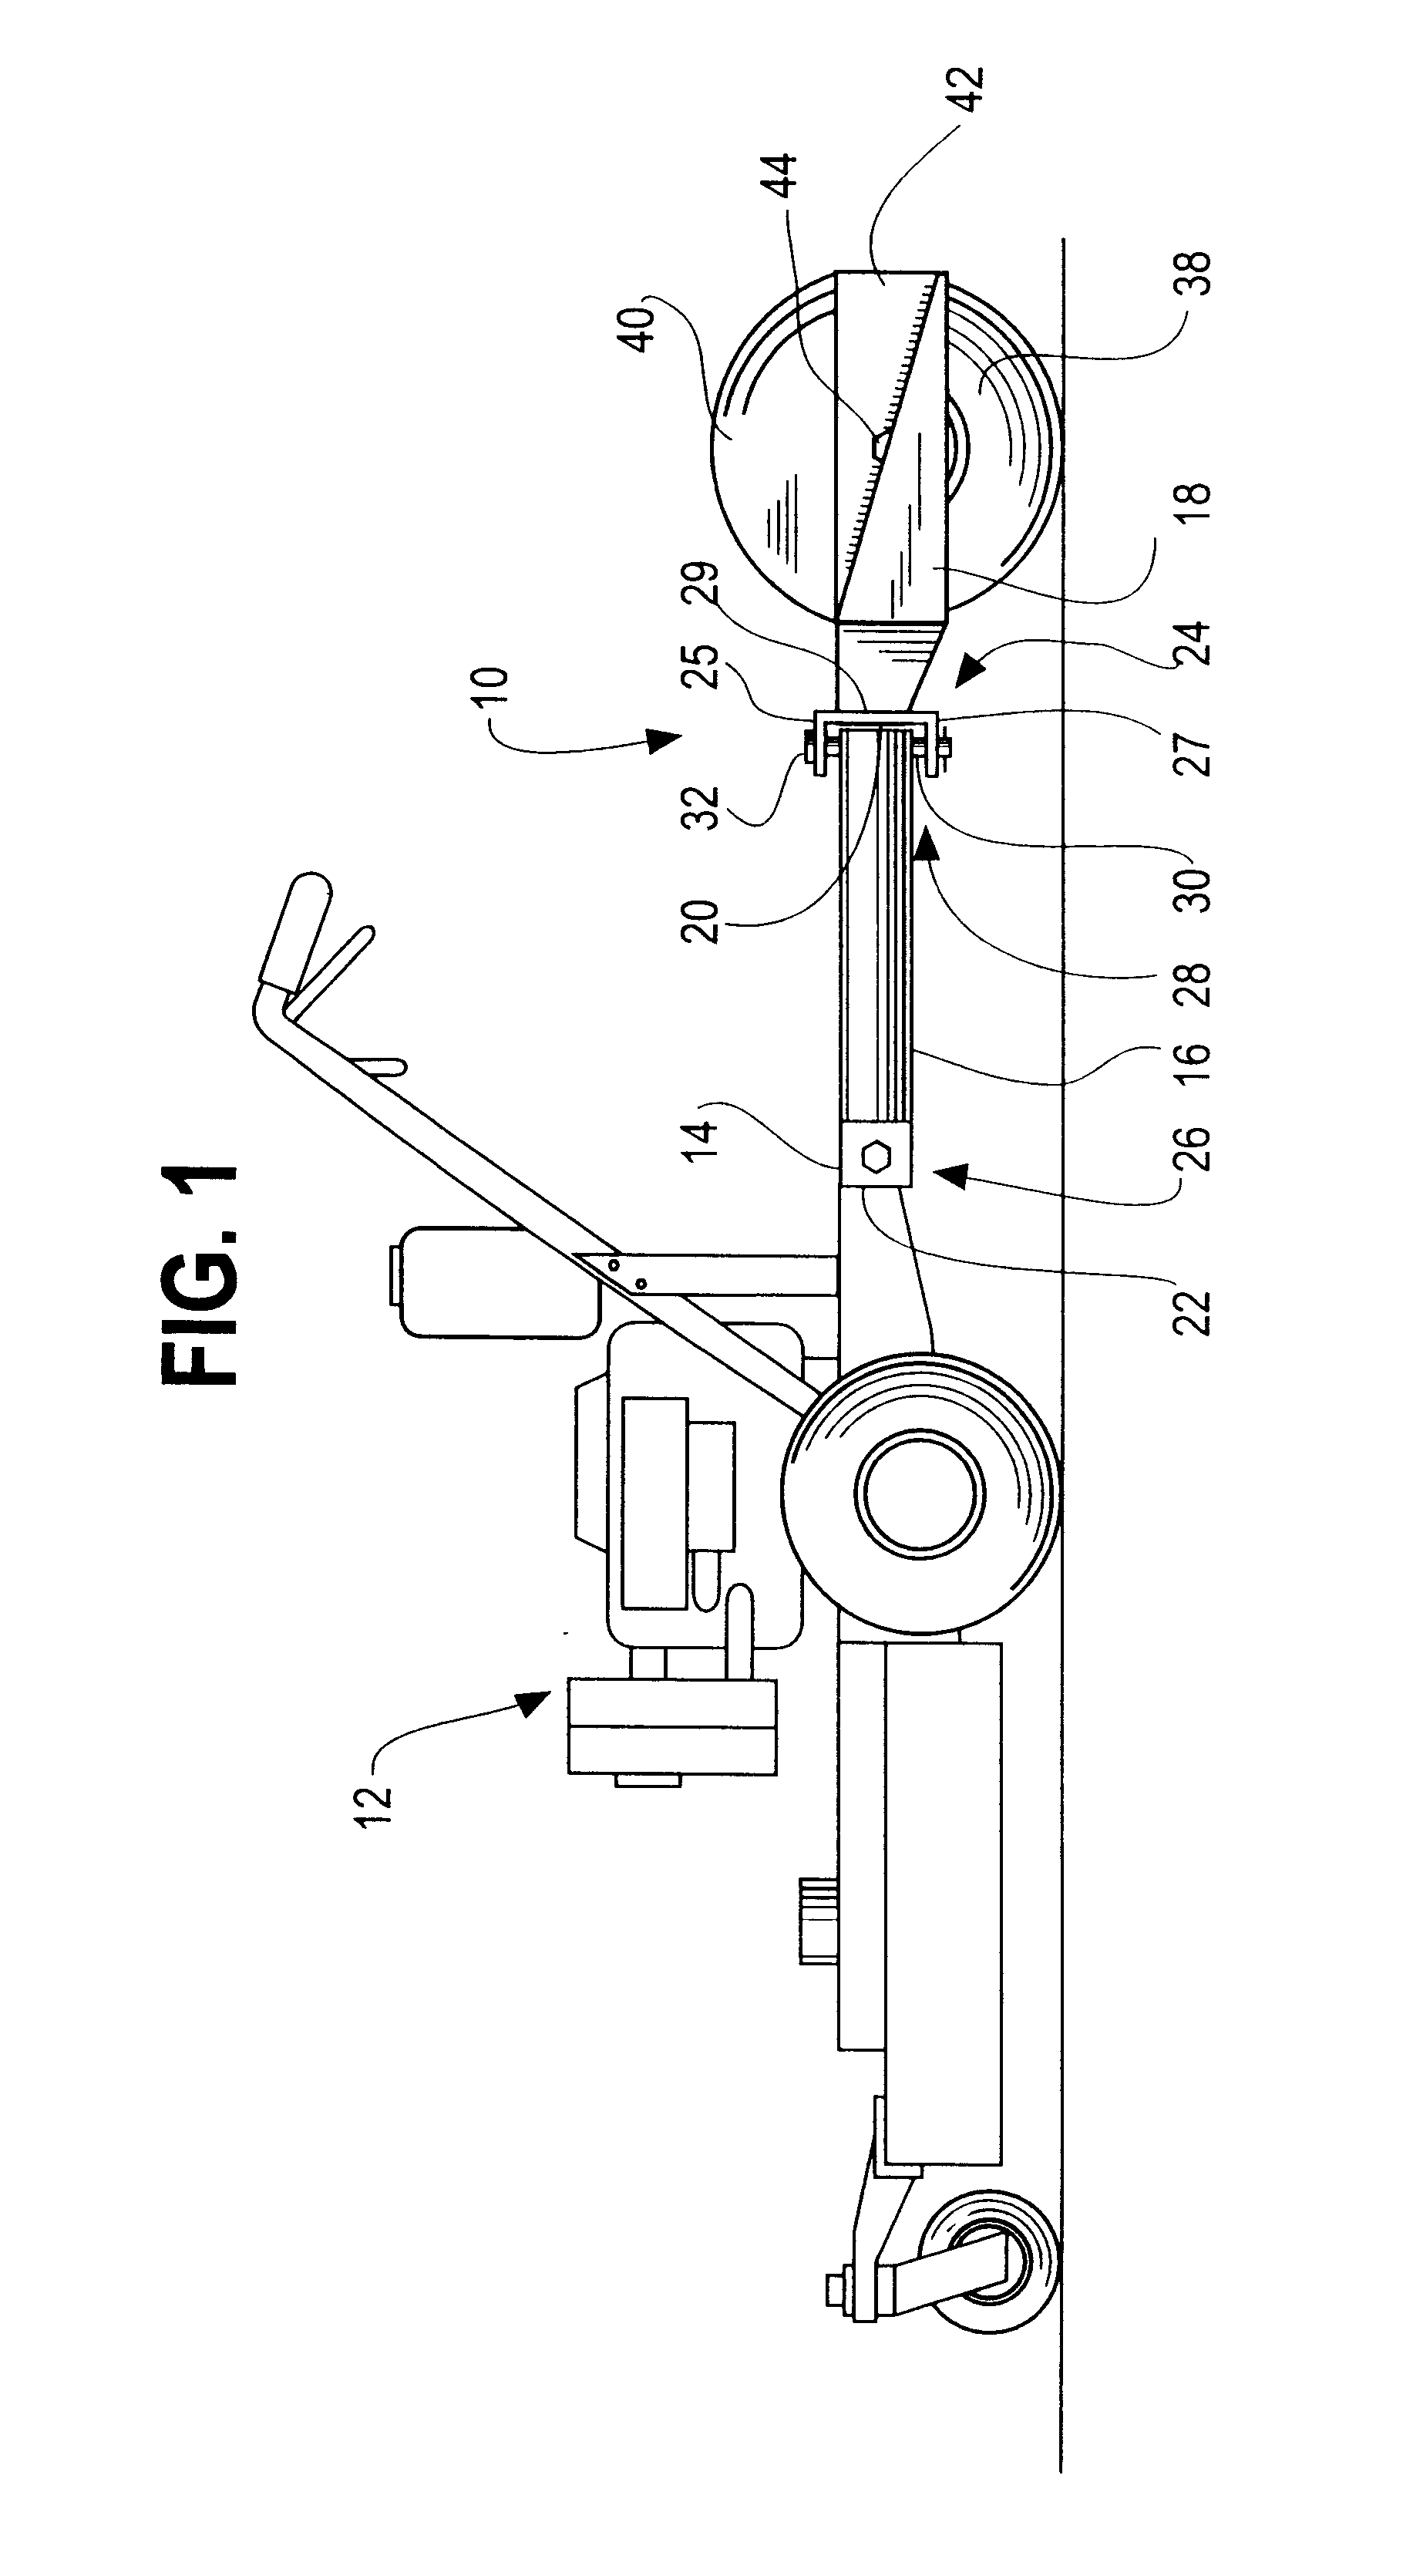 Walk behind mower sulky apparatus with improved operator platform attachment means